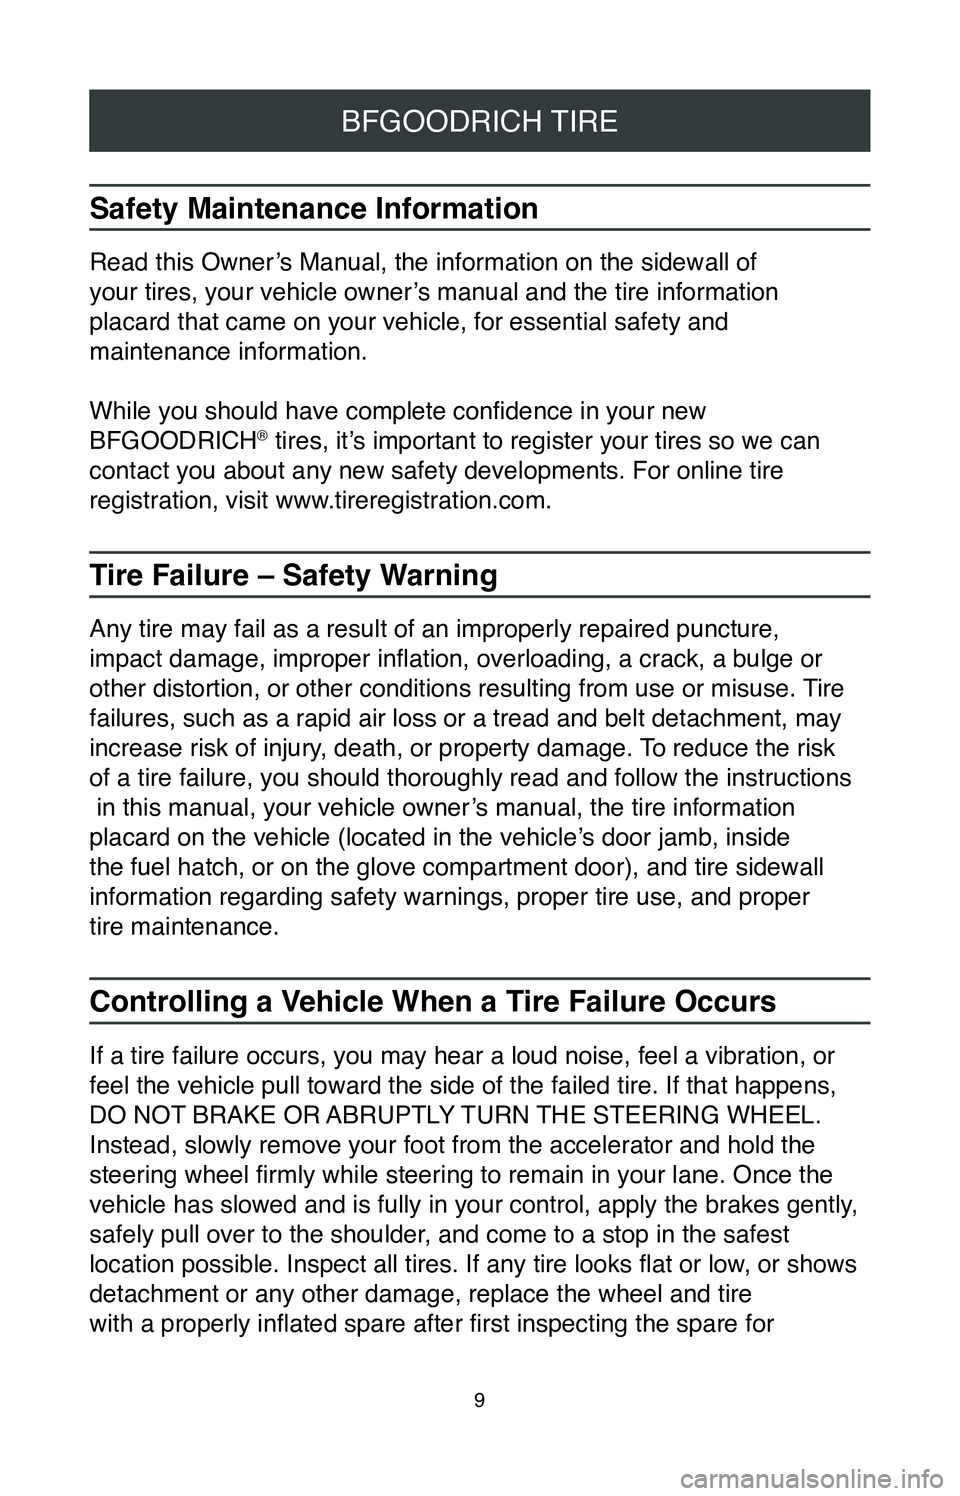 TOYOTA CAMRY 2020  Warranties & Maintenance Guides (in English) 9
BFGOODRICH TIRE
Safety Maintenance Information
Read this Owner’s Manual, the information on the sidewall of  
your tires, your vehicle owner’s manual and the tire information   
placard that cam